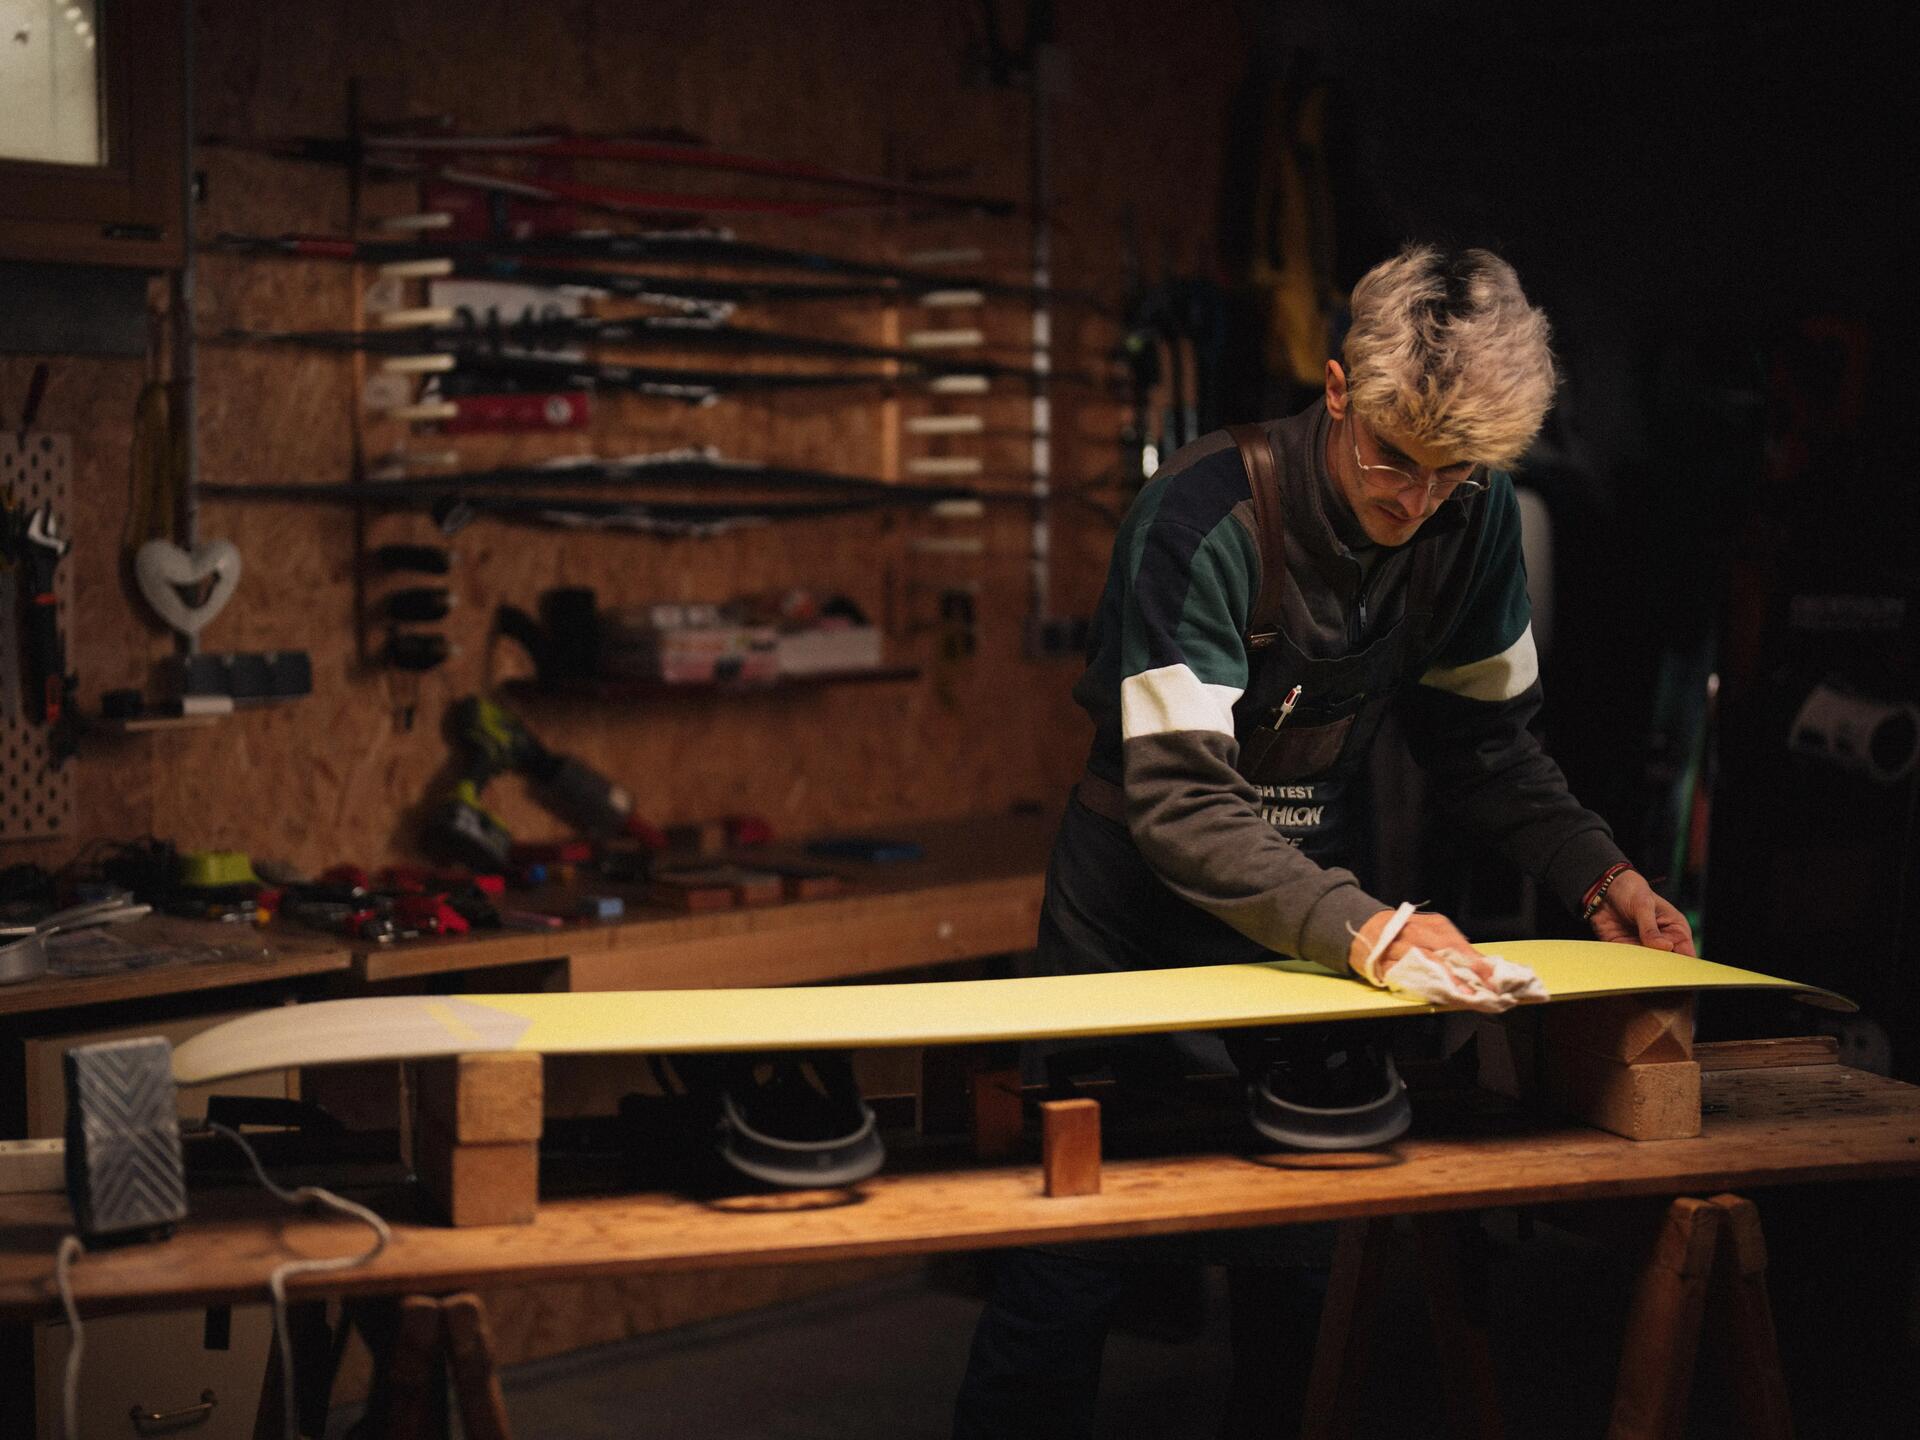 Our sharpening guide for your snowboard